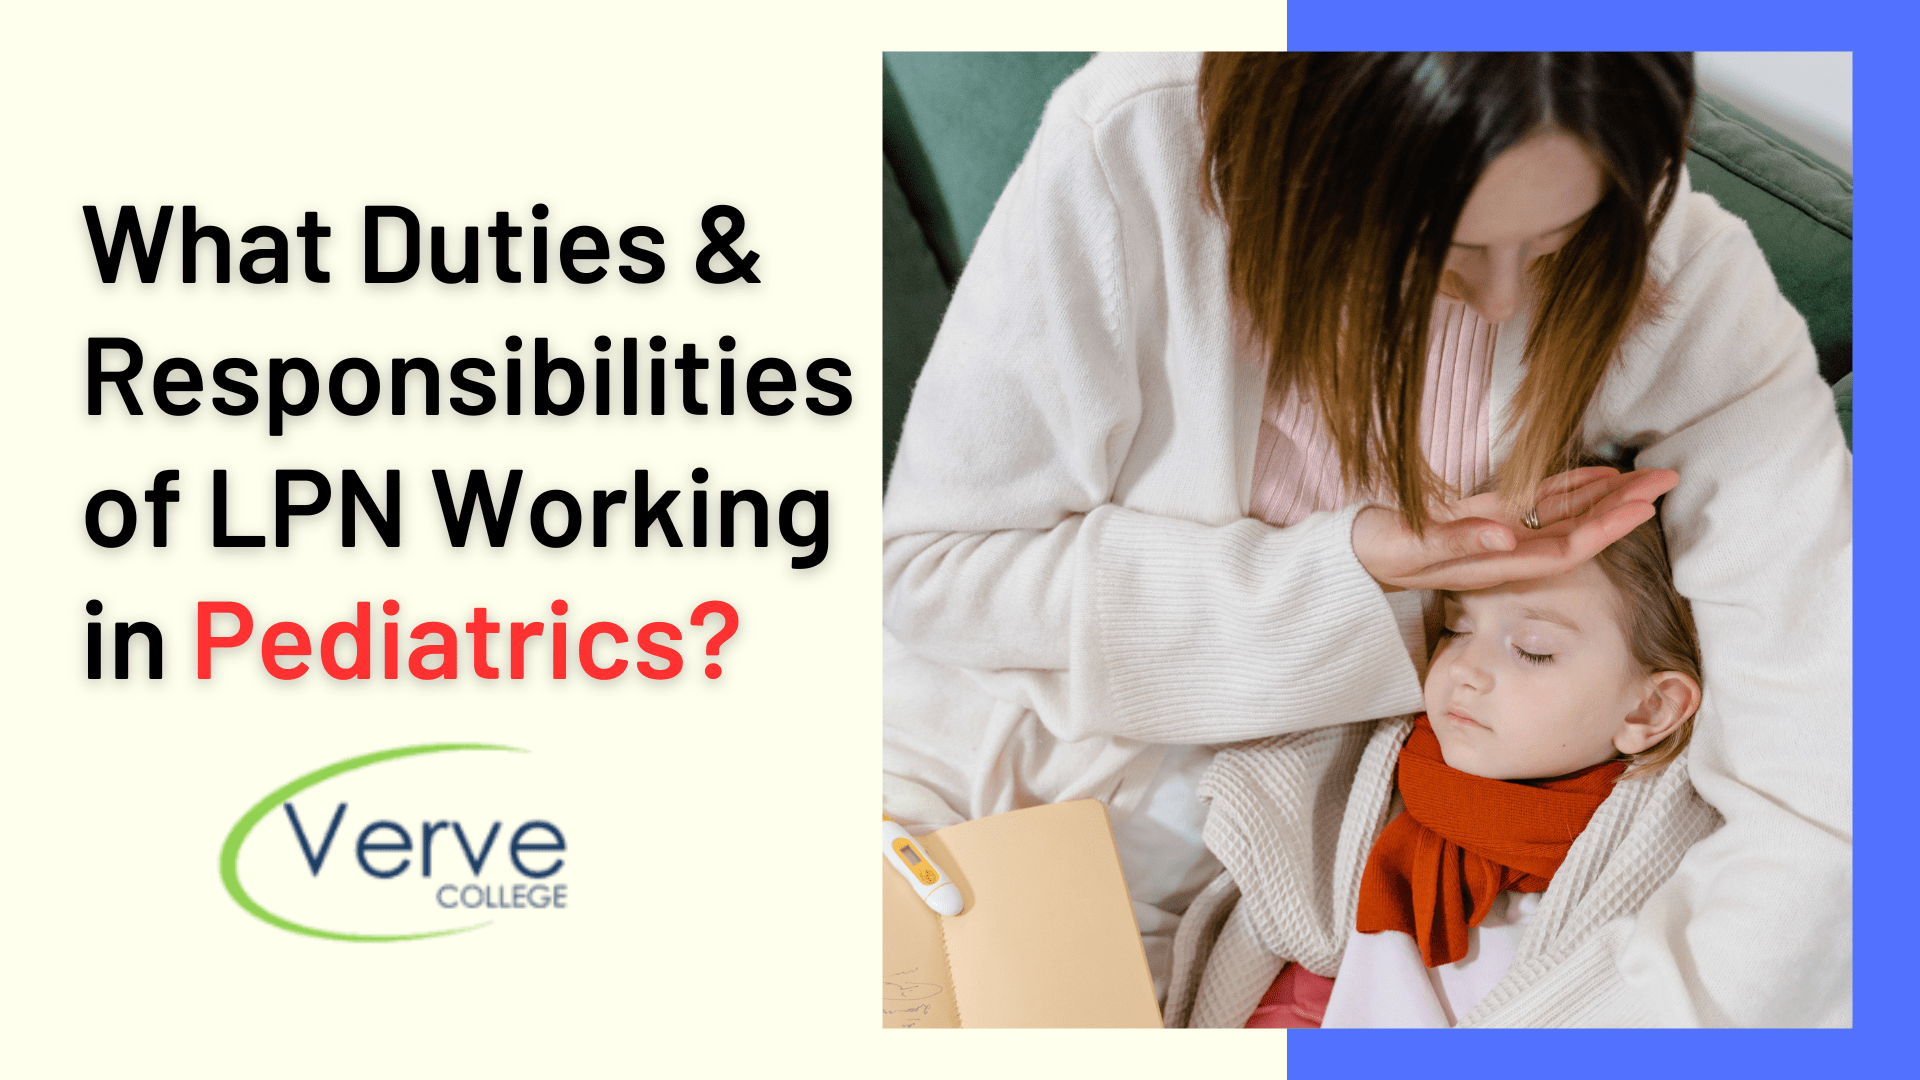 What Duties and Responsibilities of an LPN Working in Pediatrics?